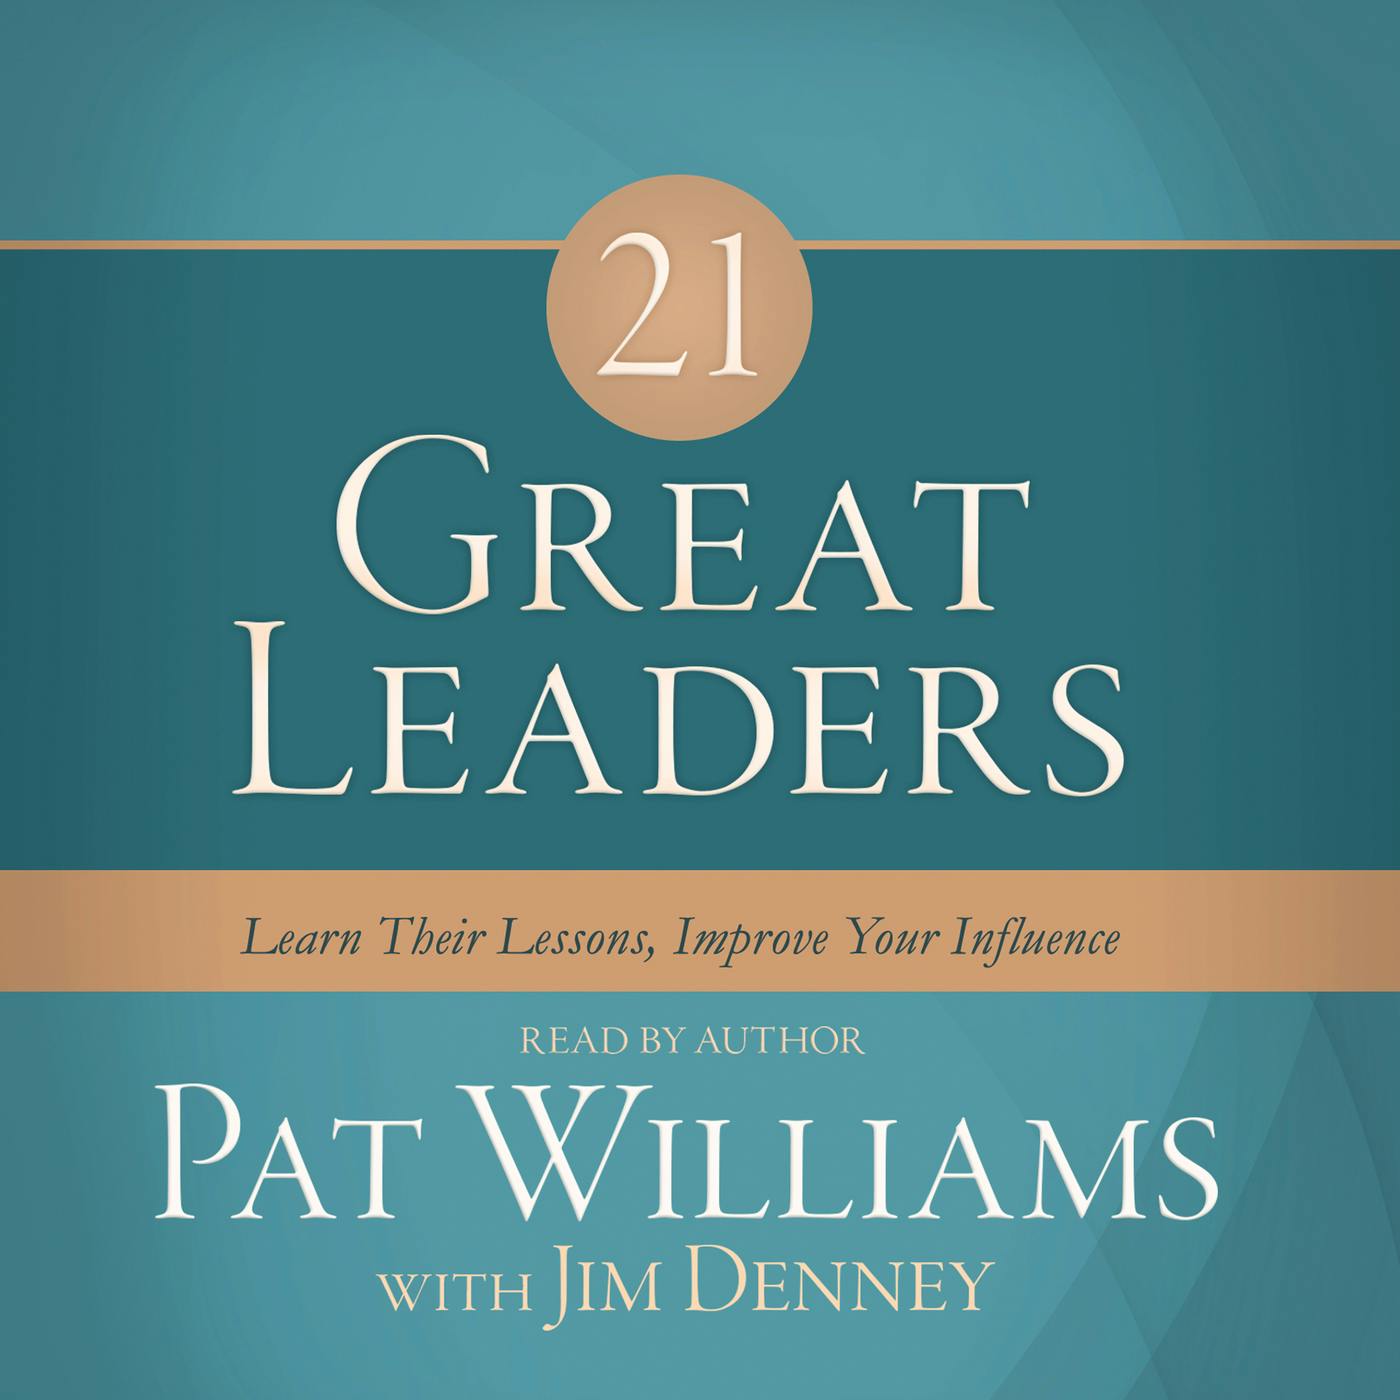 21 Great Leaders - Learn Their Lessons, Improve Your Influence (Unabridged) - Jim Denney, Pat Williams